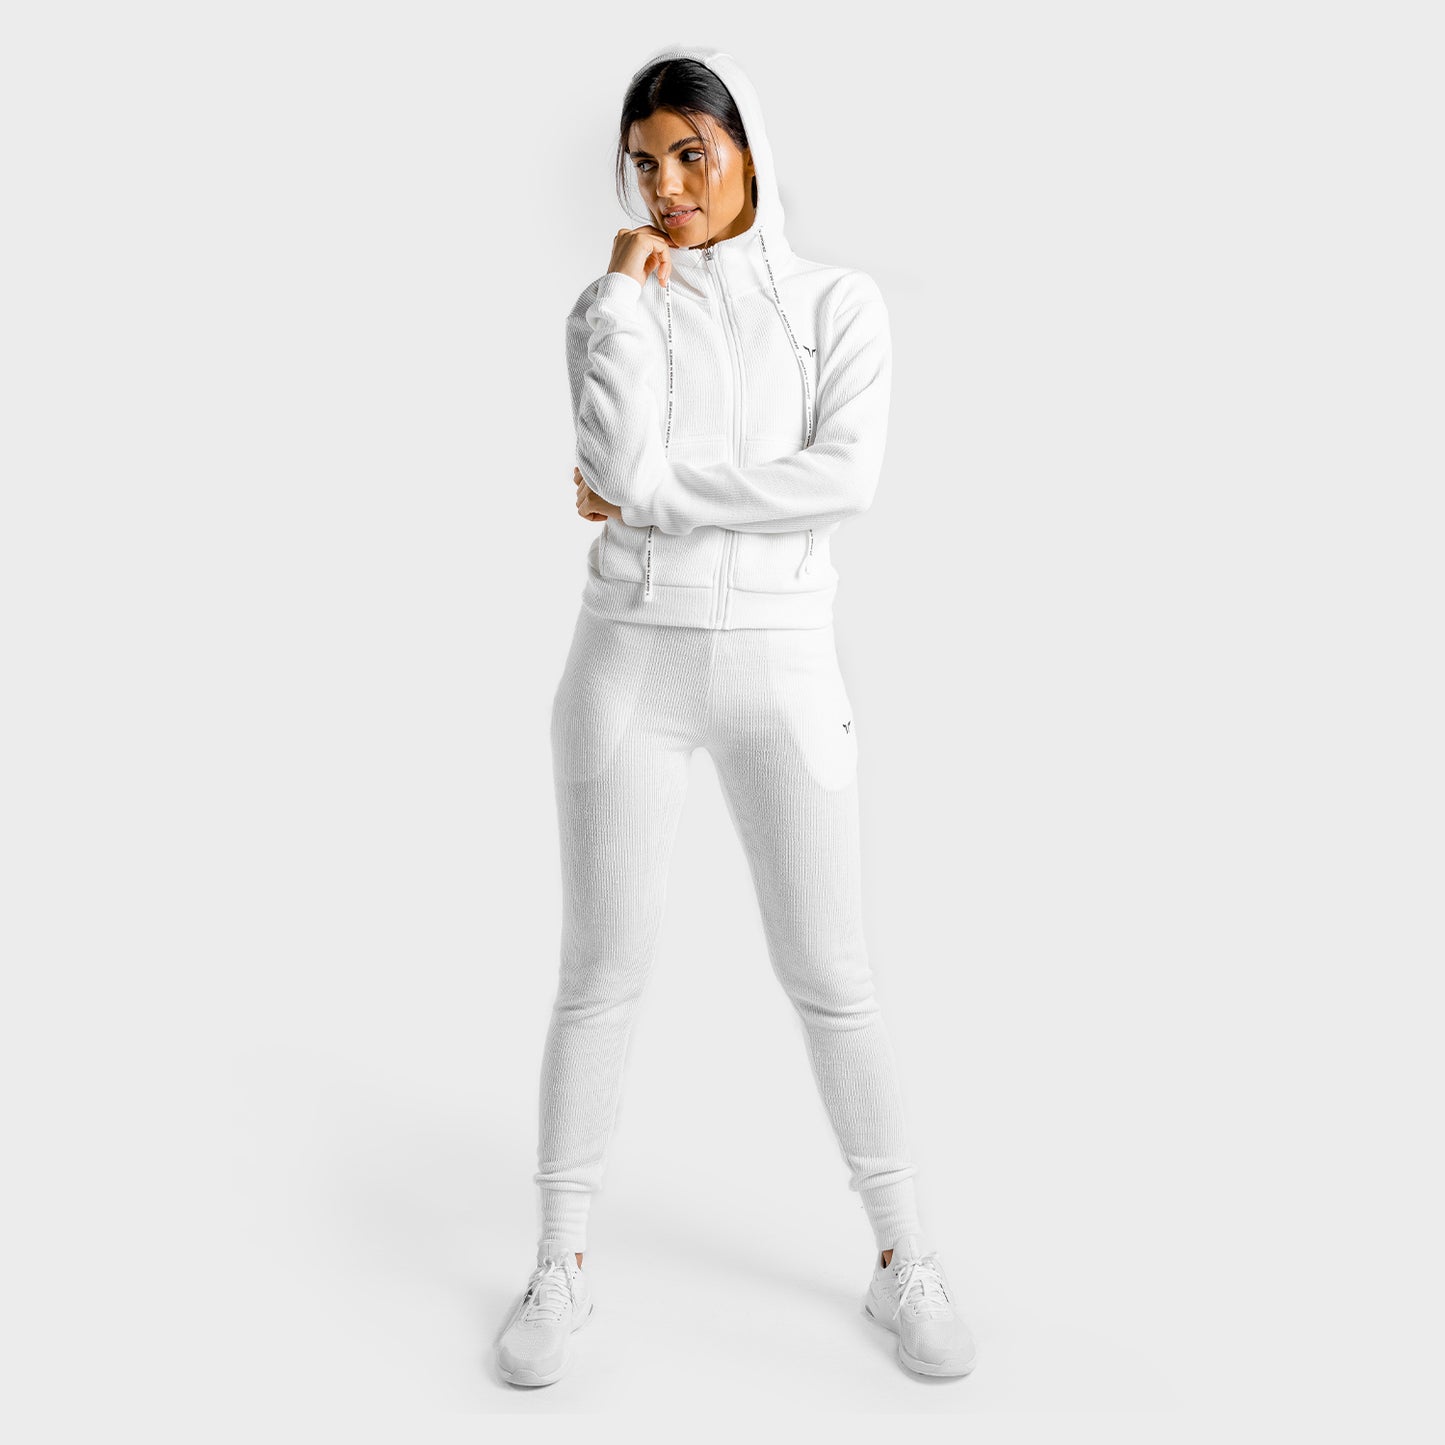 squatwolf-gym-hoodies-women-luxe-zip-up-white-workout-clothes